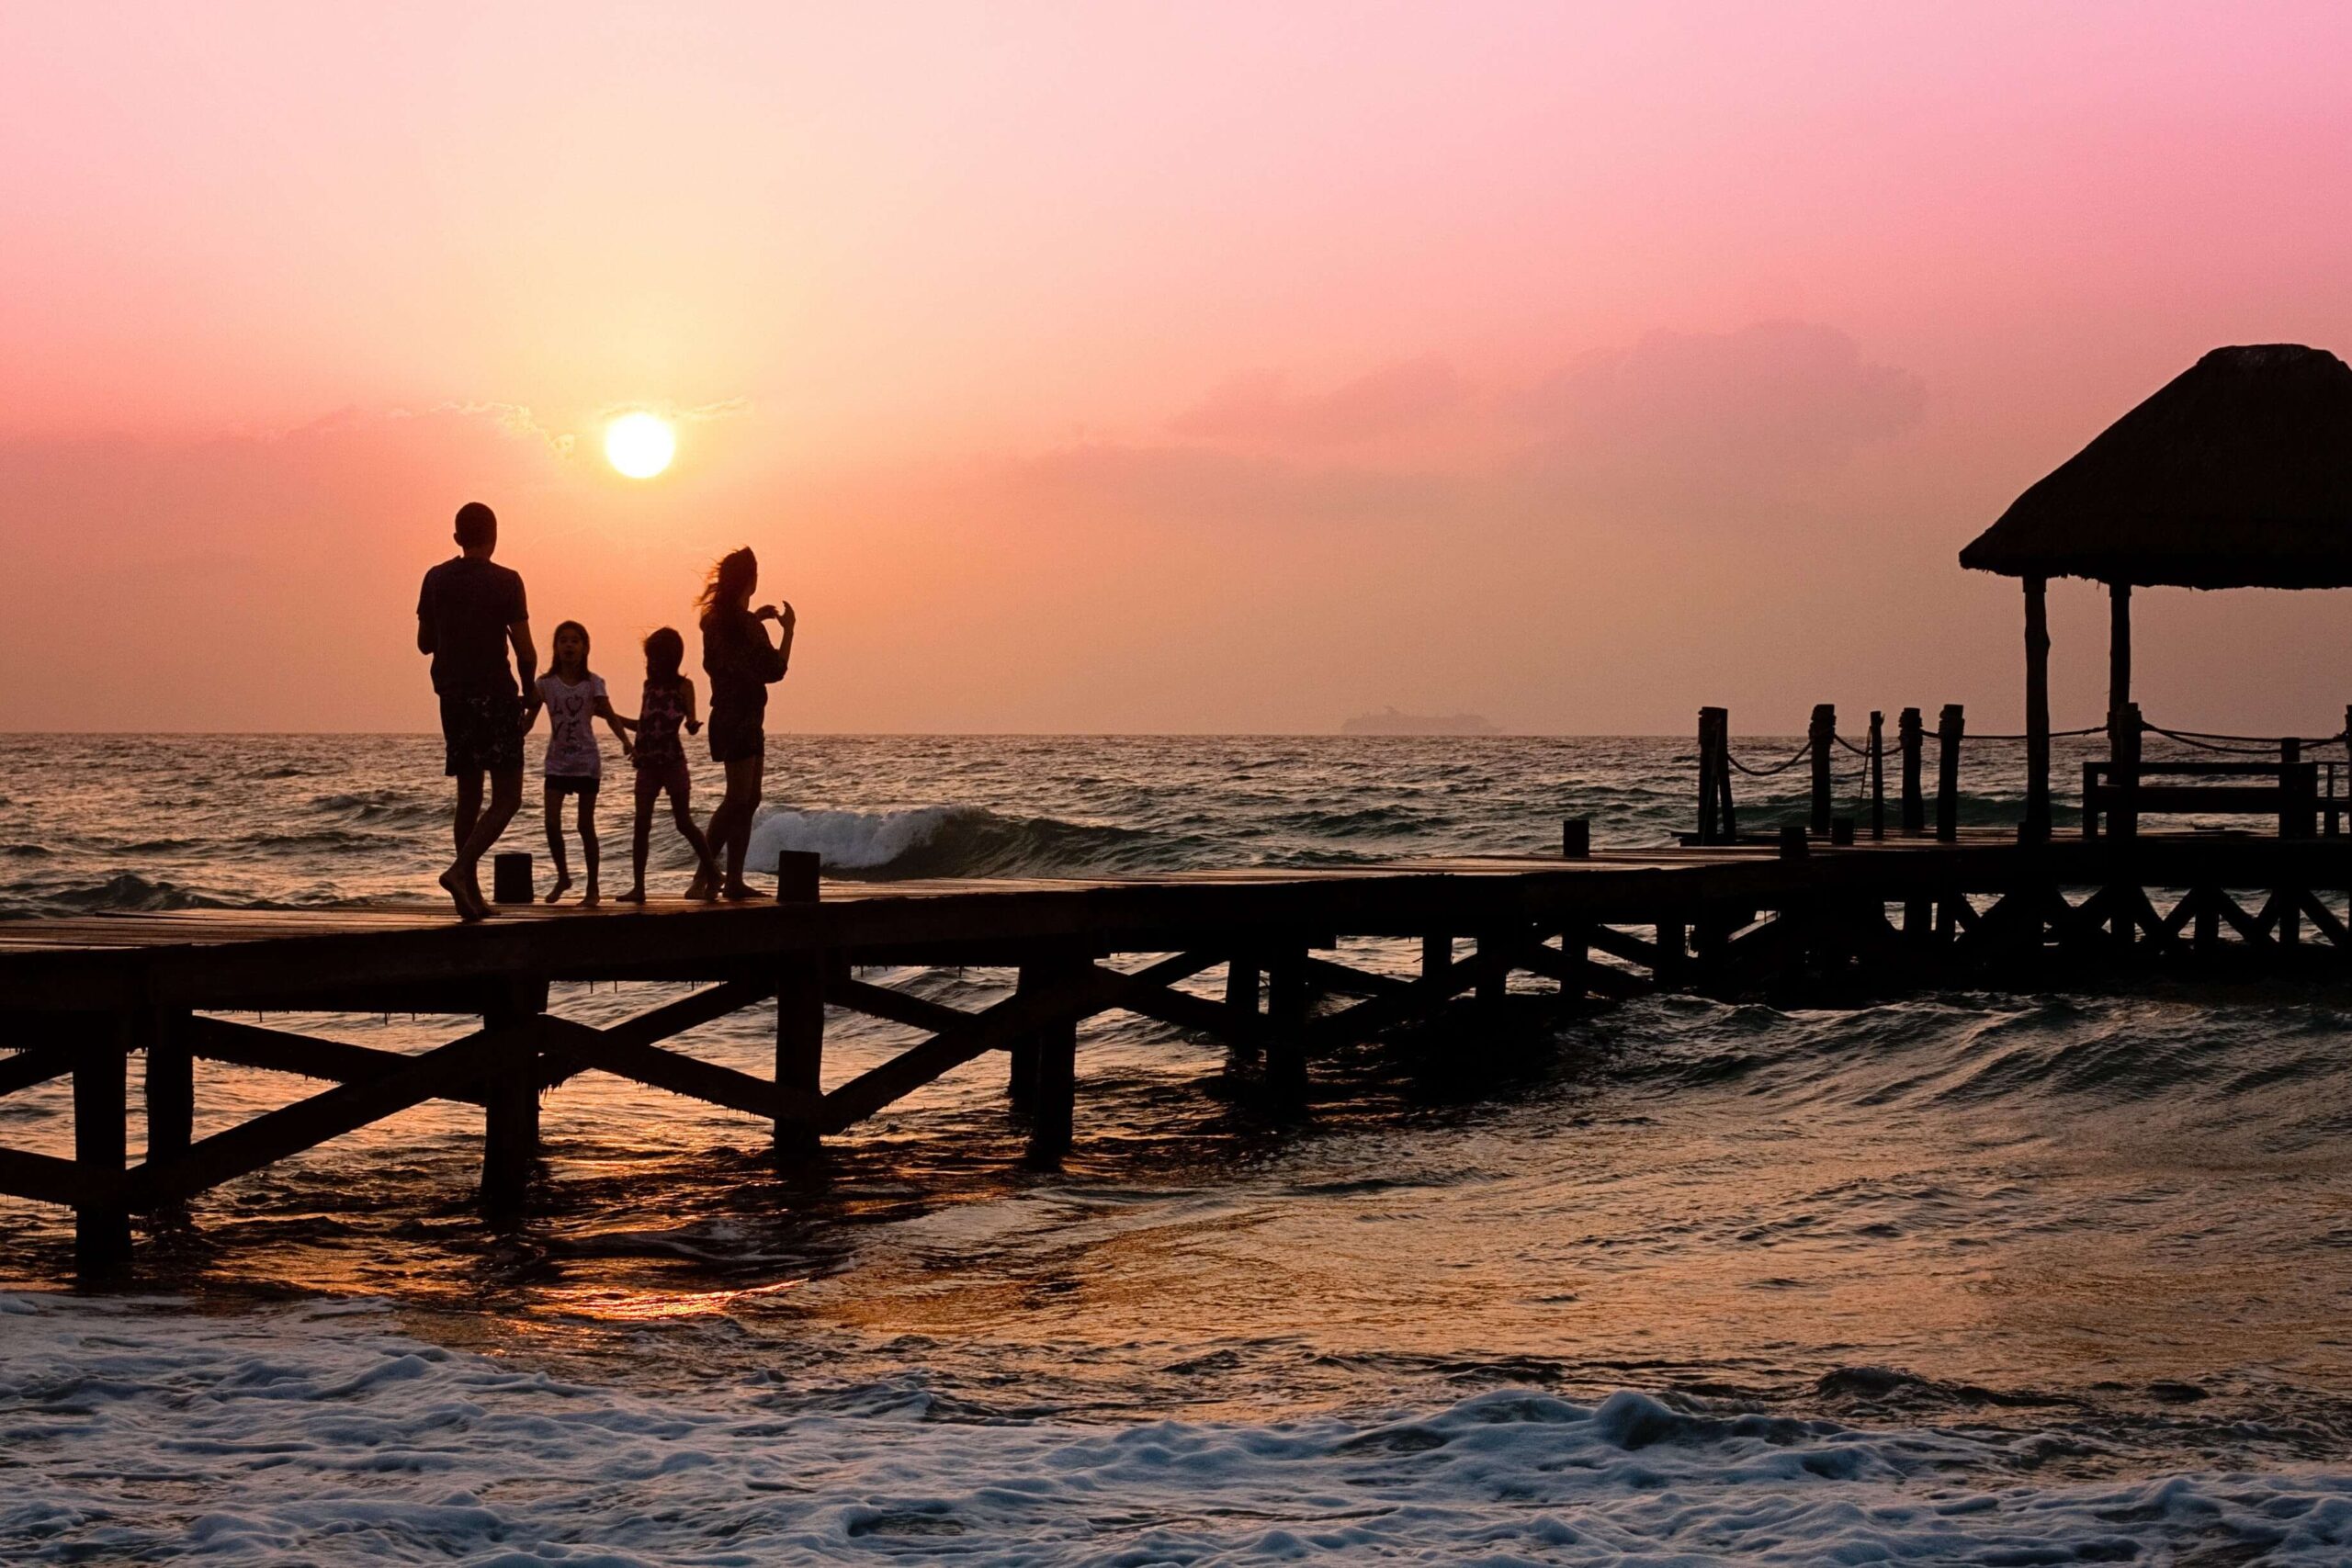 Family walking on the pier at sunset. Looking for a family therapist in Saint Petersburg, FL to help you reconnect or overcome challenges? Call today.